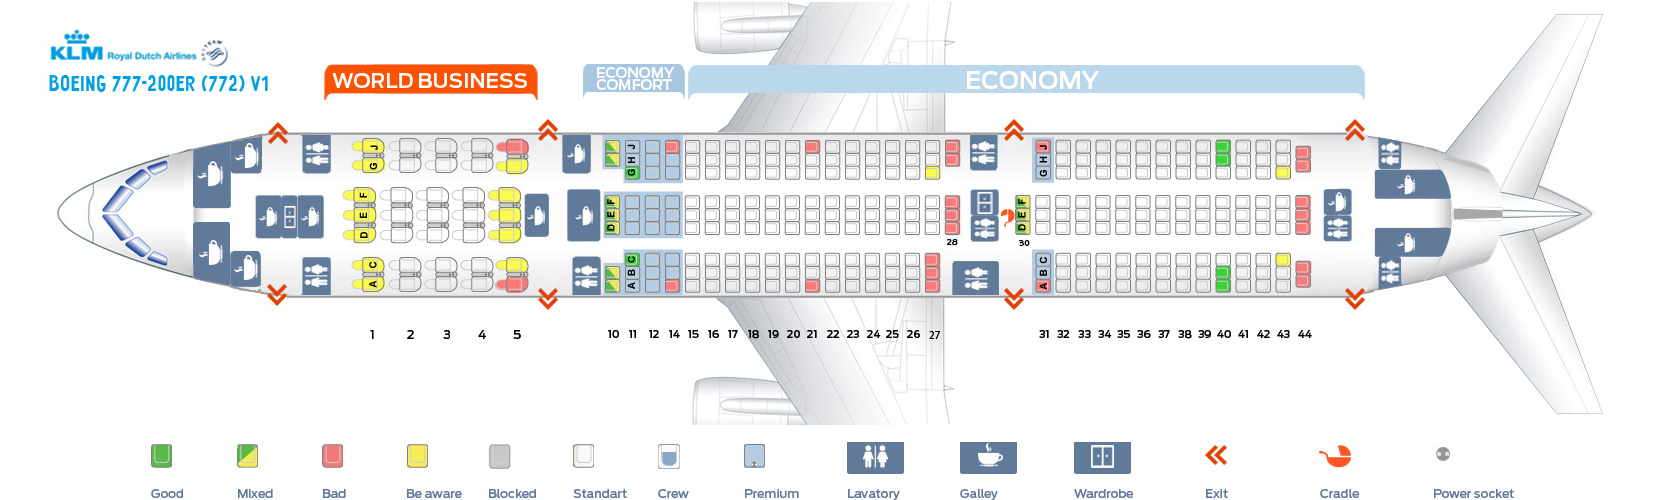 Seat map Boeing 777-200 KLM. Best seats in the plane